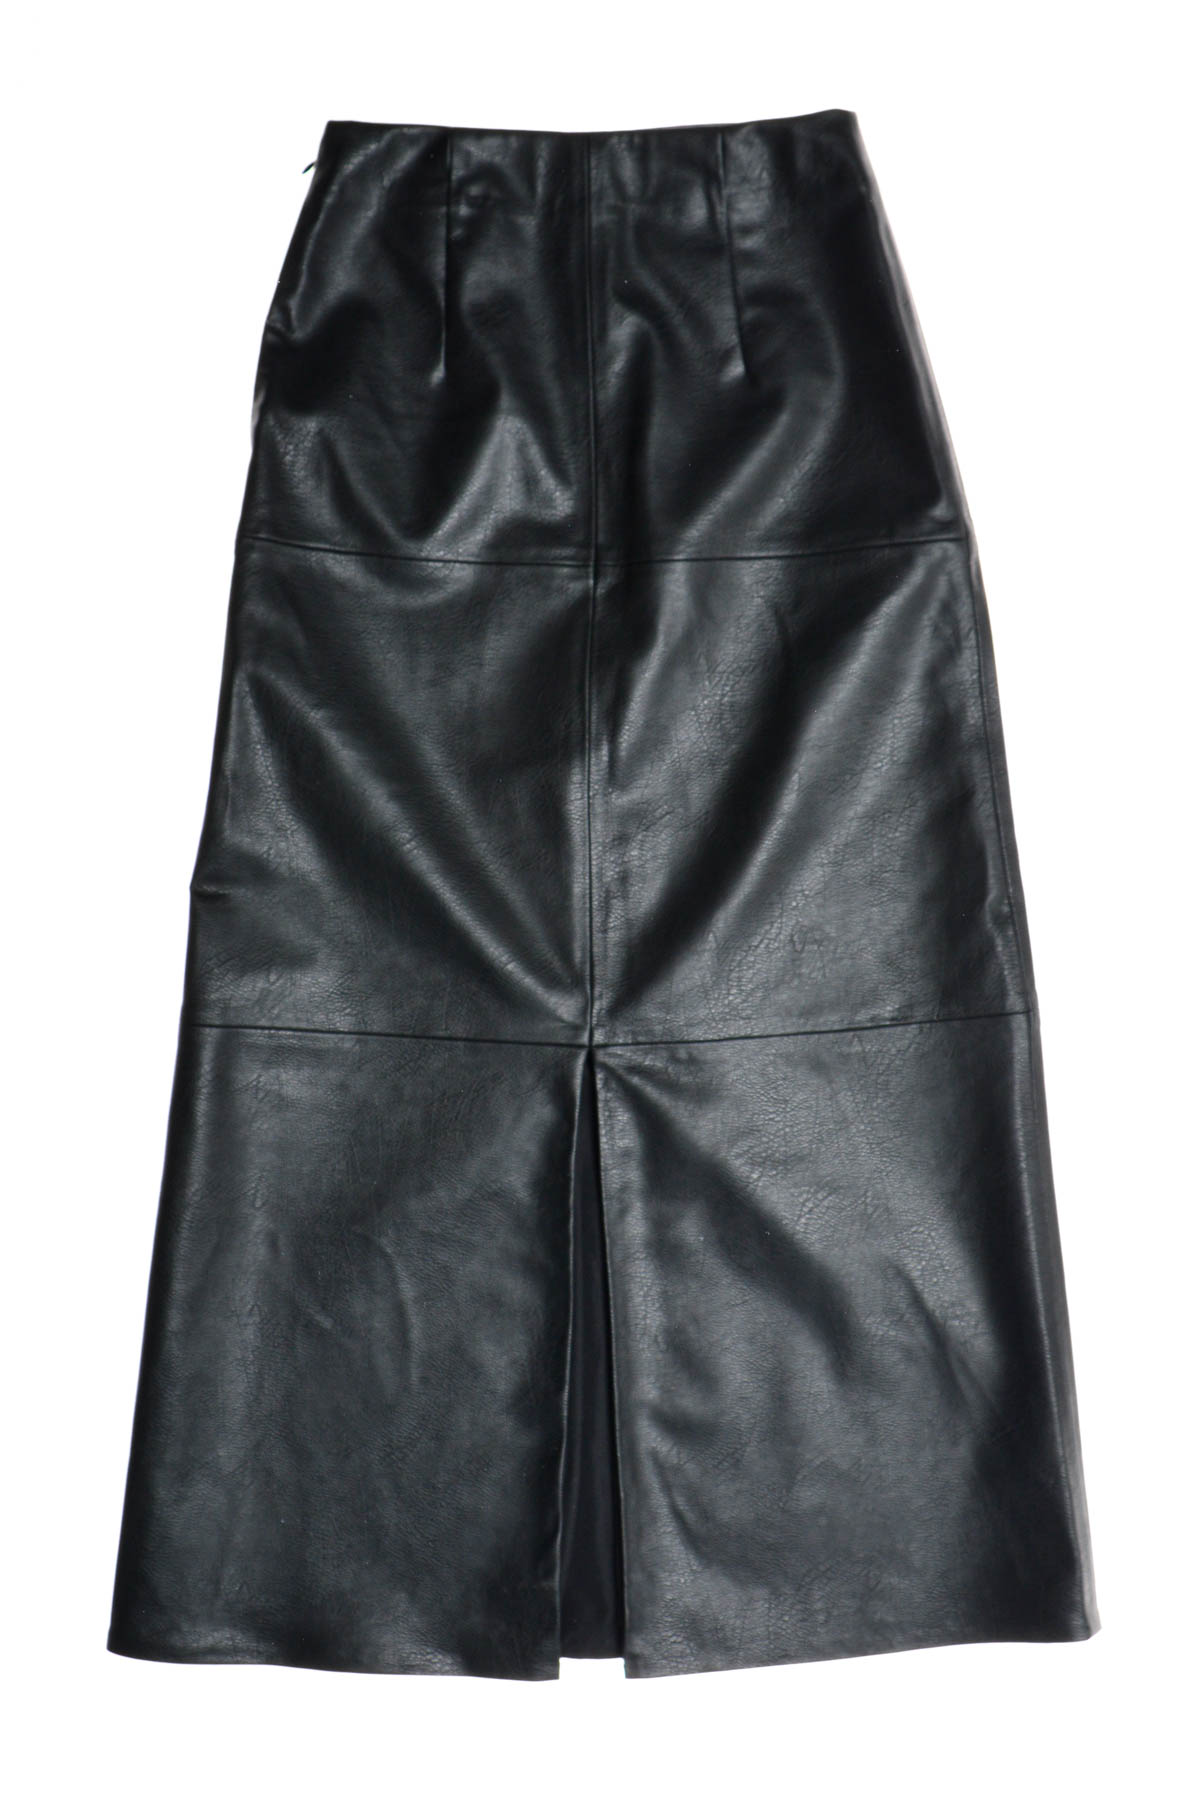 Leather skirt - H&M - 0